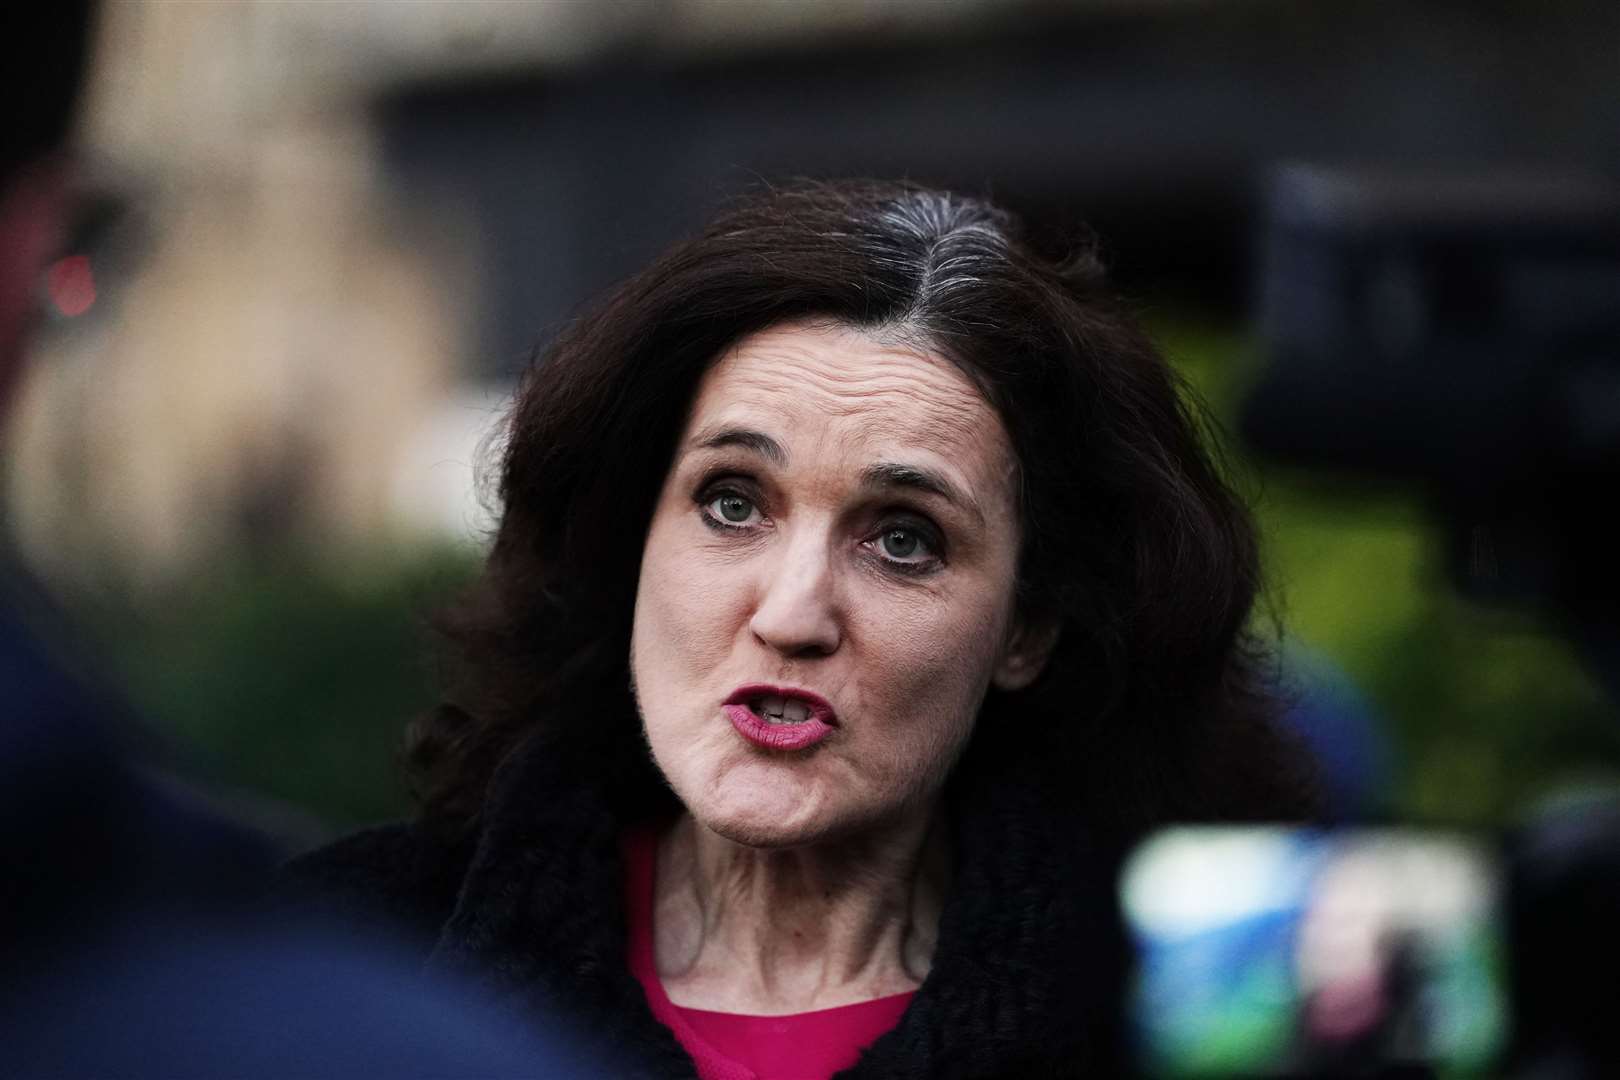 Former cabinet minister Theresa Villiers said her Chipping Barnet constituents ‘feel badly let down’ by the votes at the UN (Jordan Pettitt/PA)